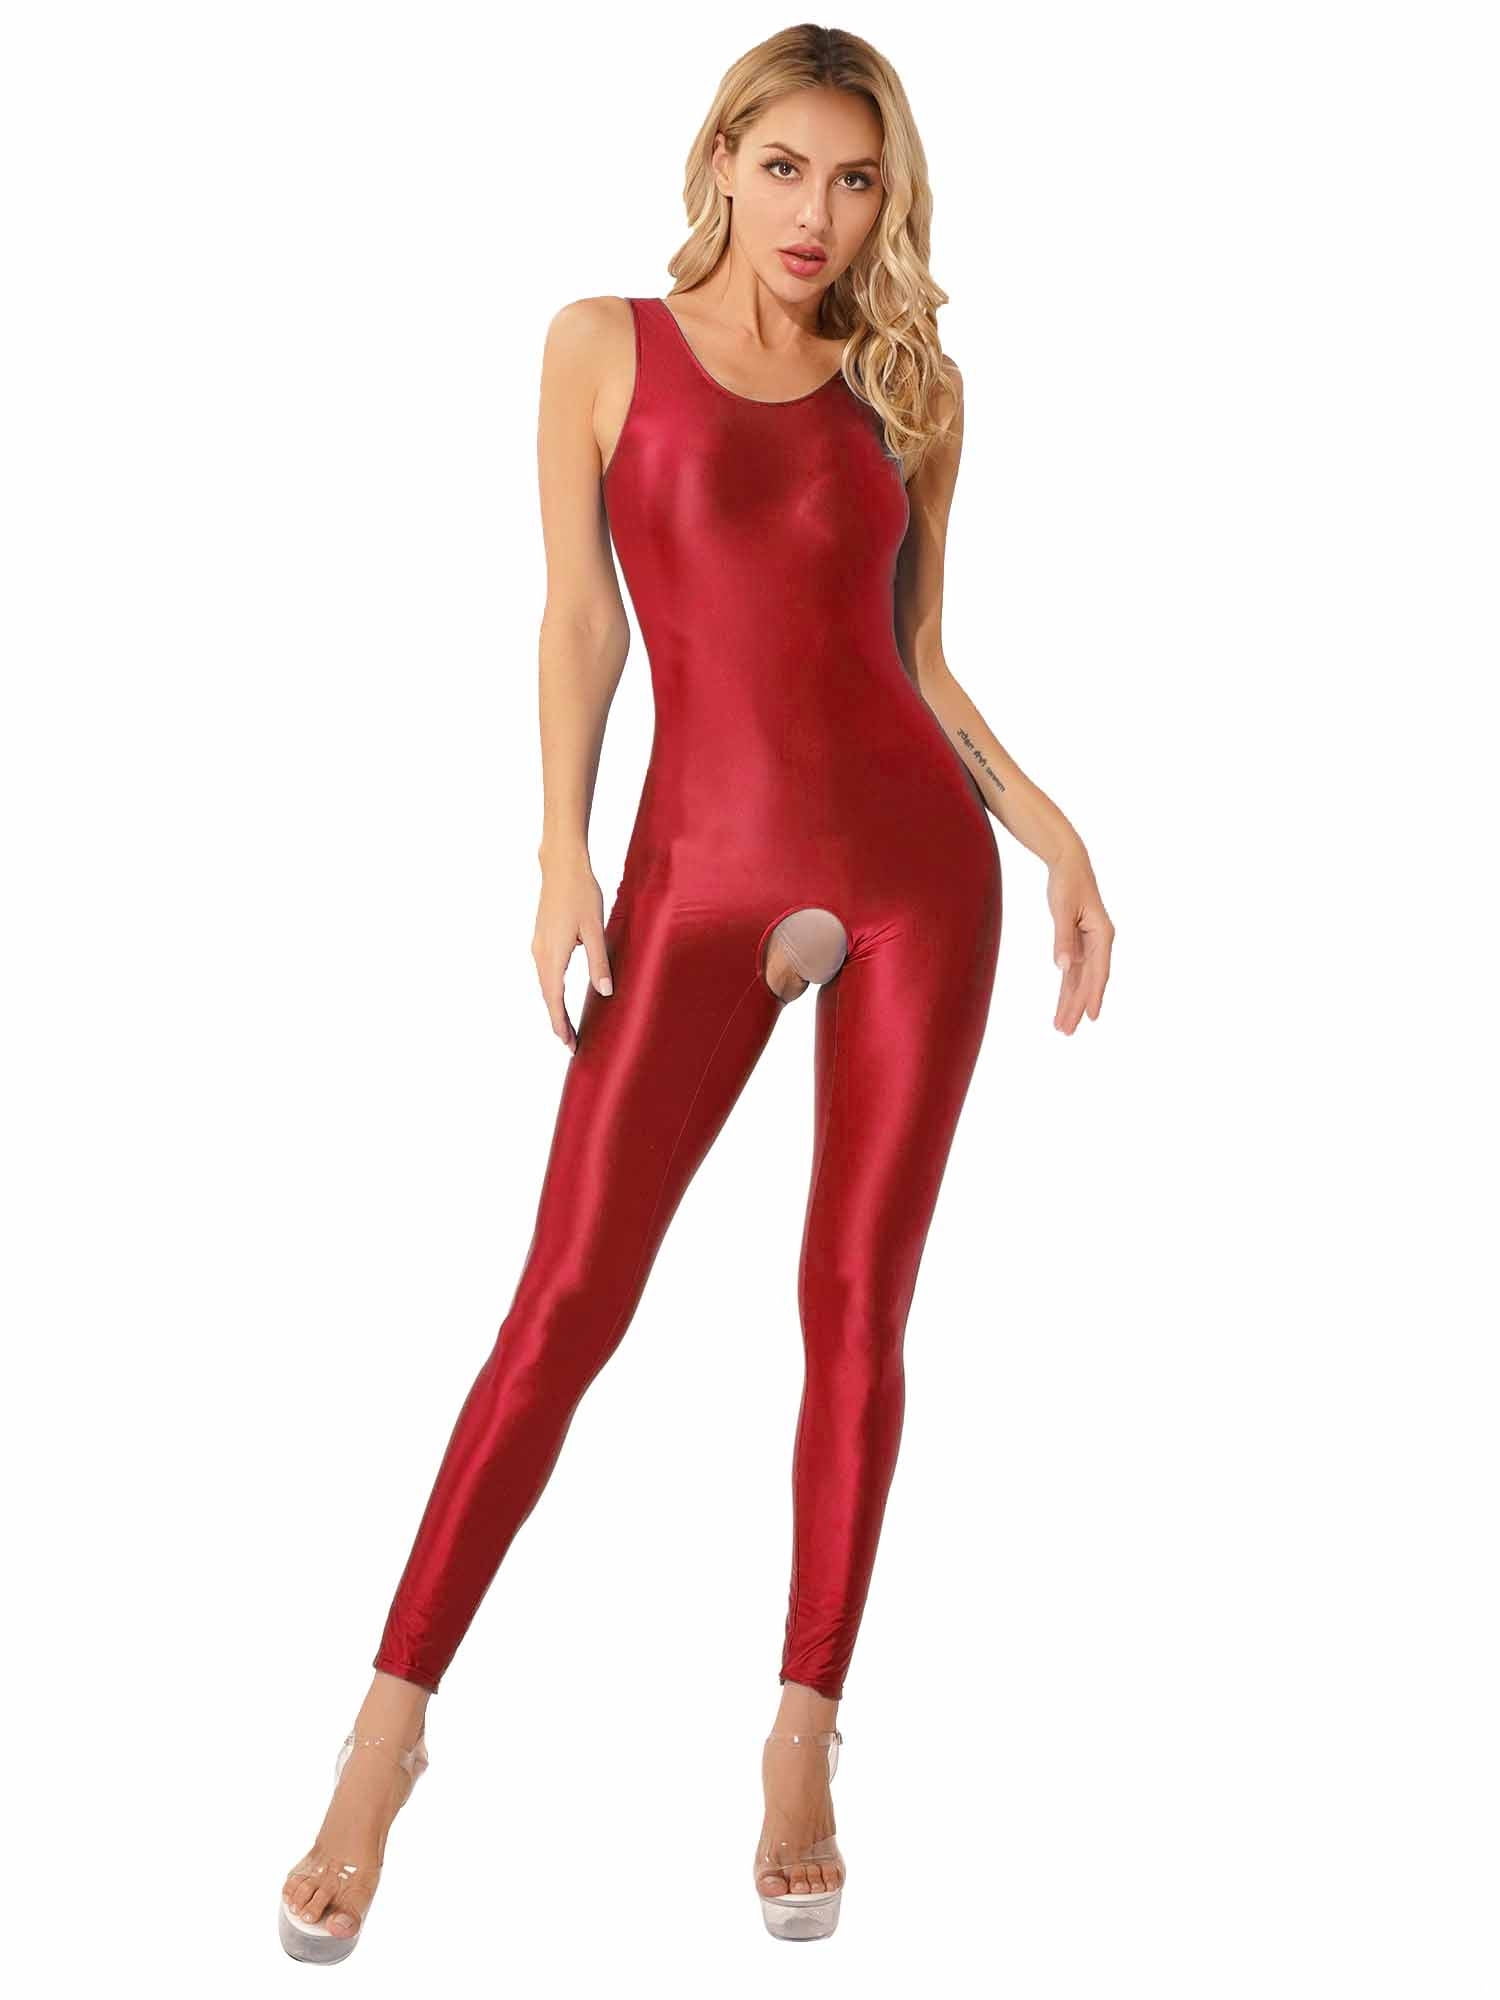 IEFIEL Womens Glossy Full Body Open Crotch Jumpsuit Tights